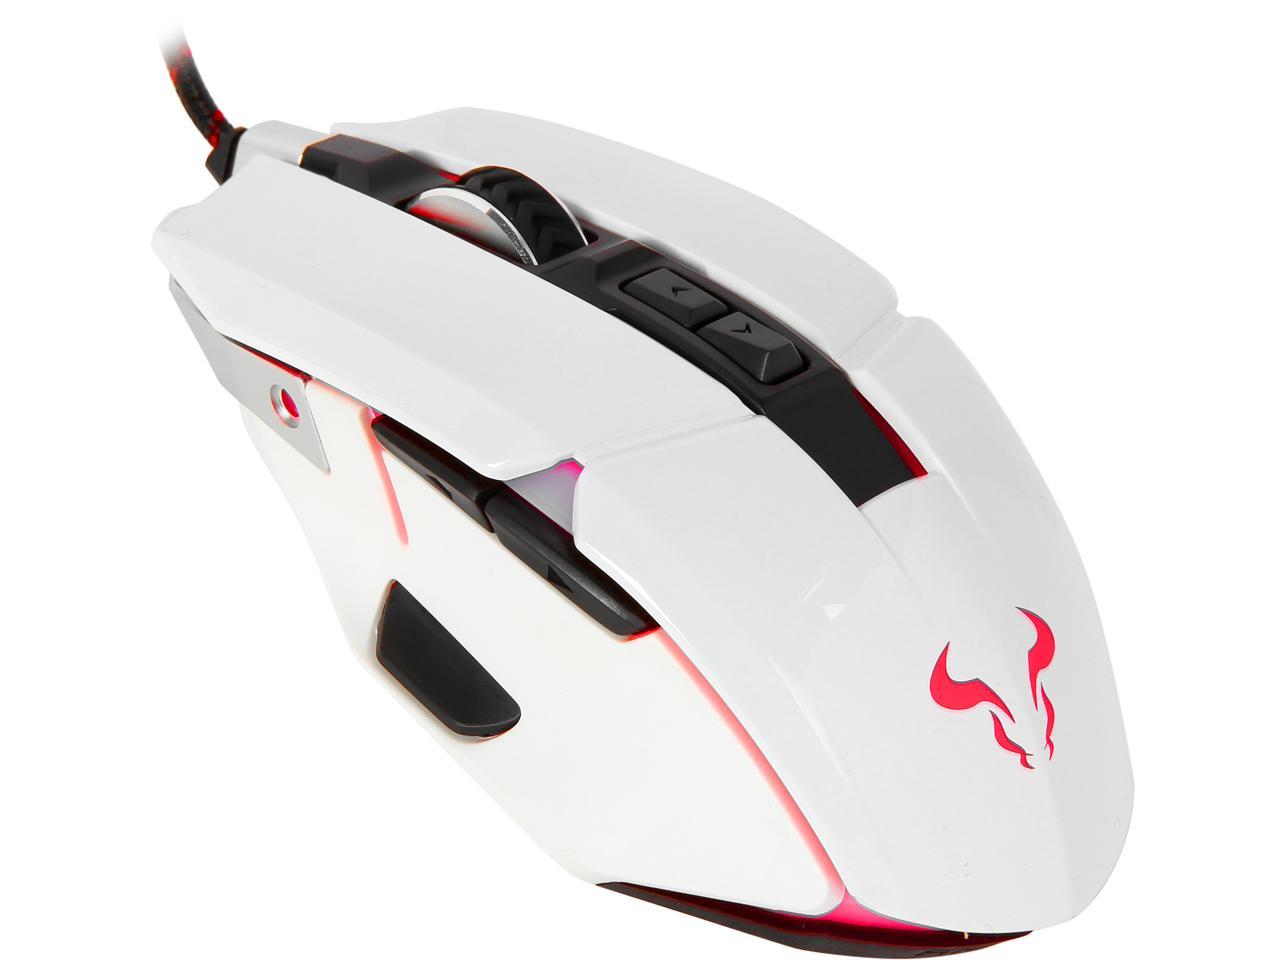 Riotoro Aurox Fps Gaming Mouse With Rgb Multicolor Lighting White 8 Programmable Buttons 10 000 Dpi Optical Sensor On The Fly Dpi Shifting Adjustable Dpi Sniper Button Limited Edition Newegg Com